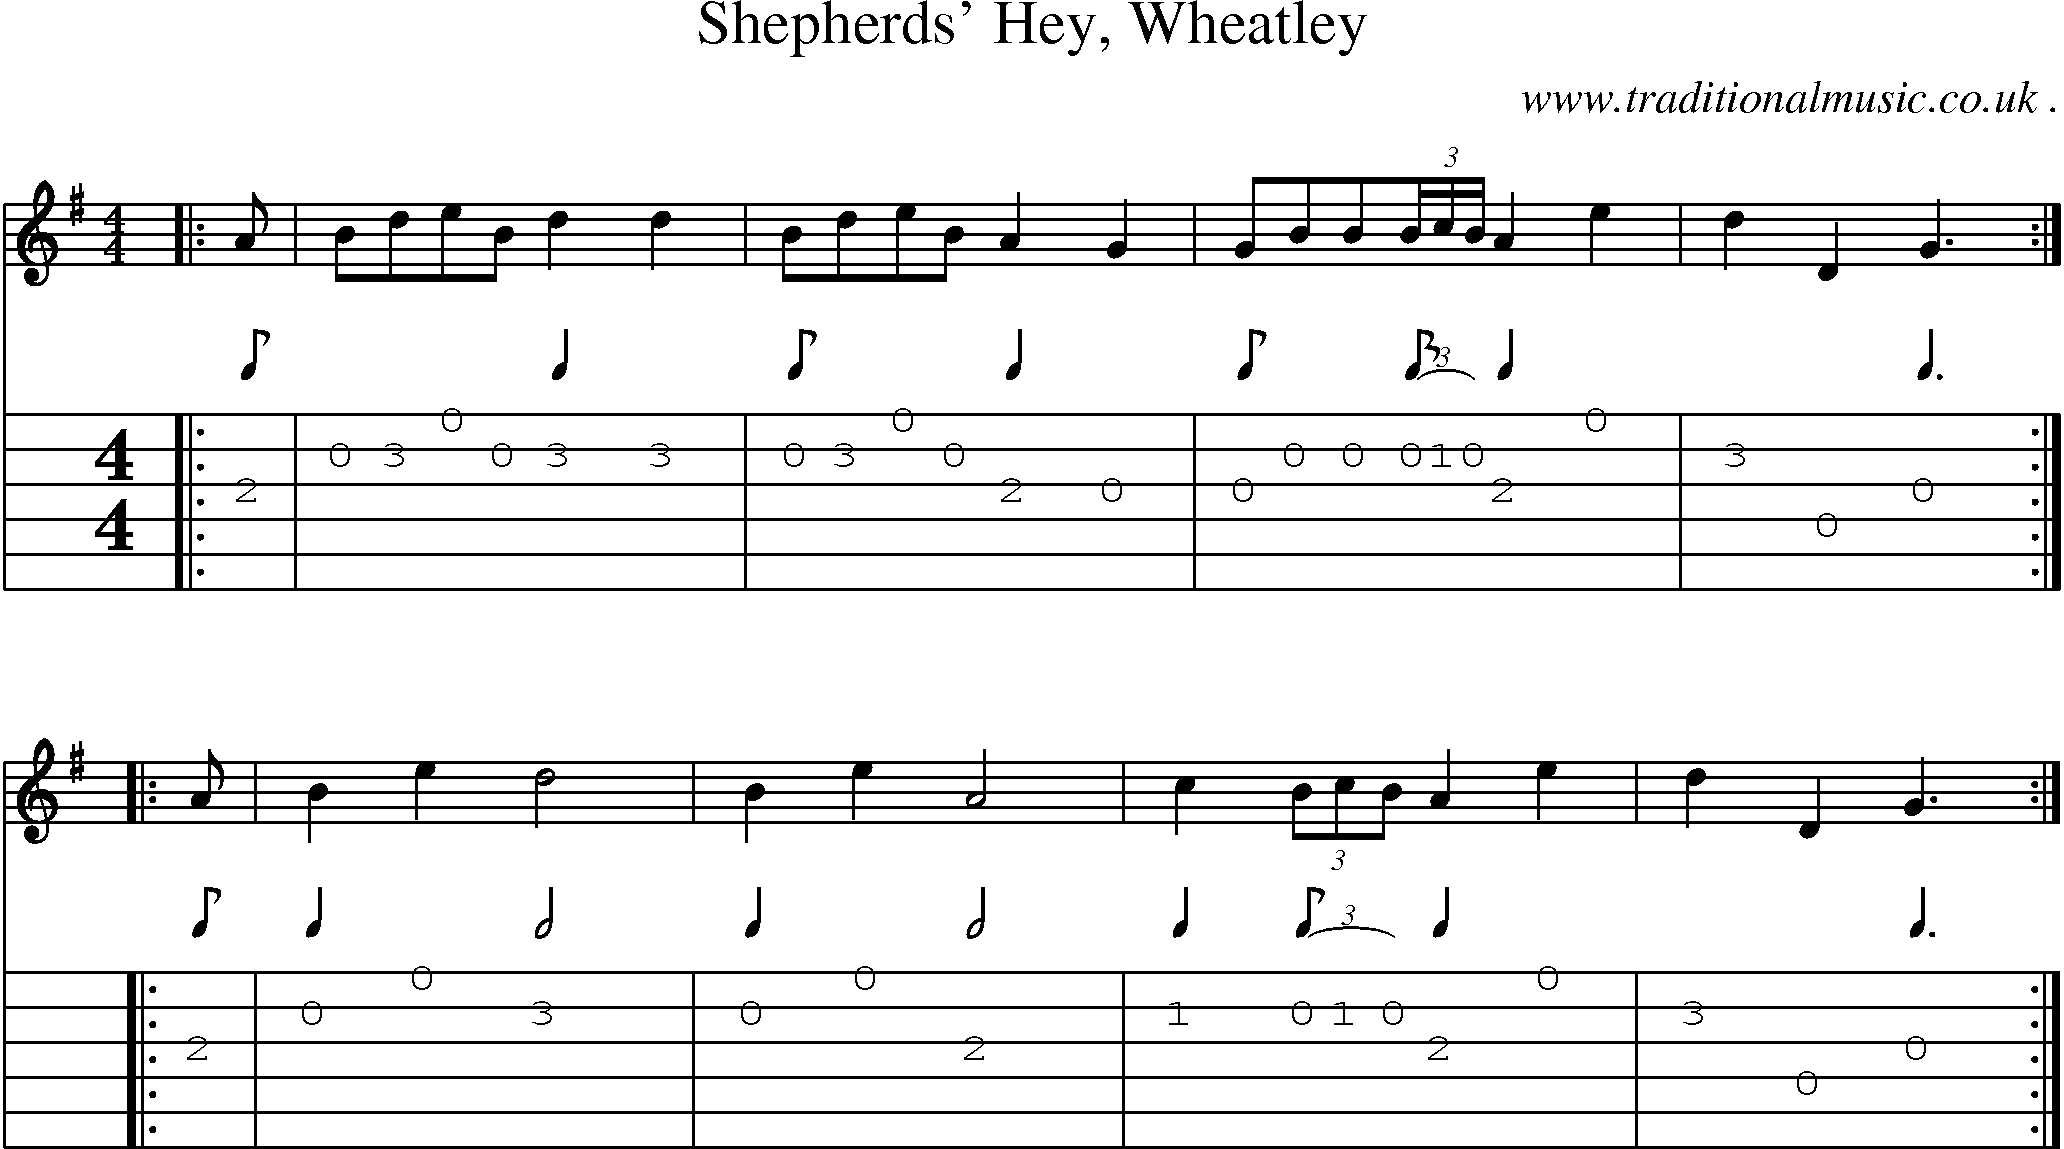 Sheet-Music and Guitar Tabs for Shepherds Hey Wheatley